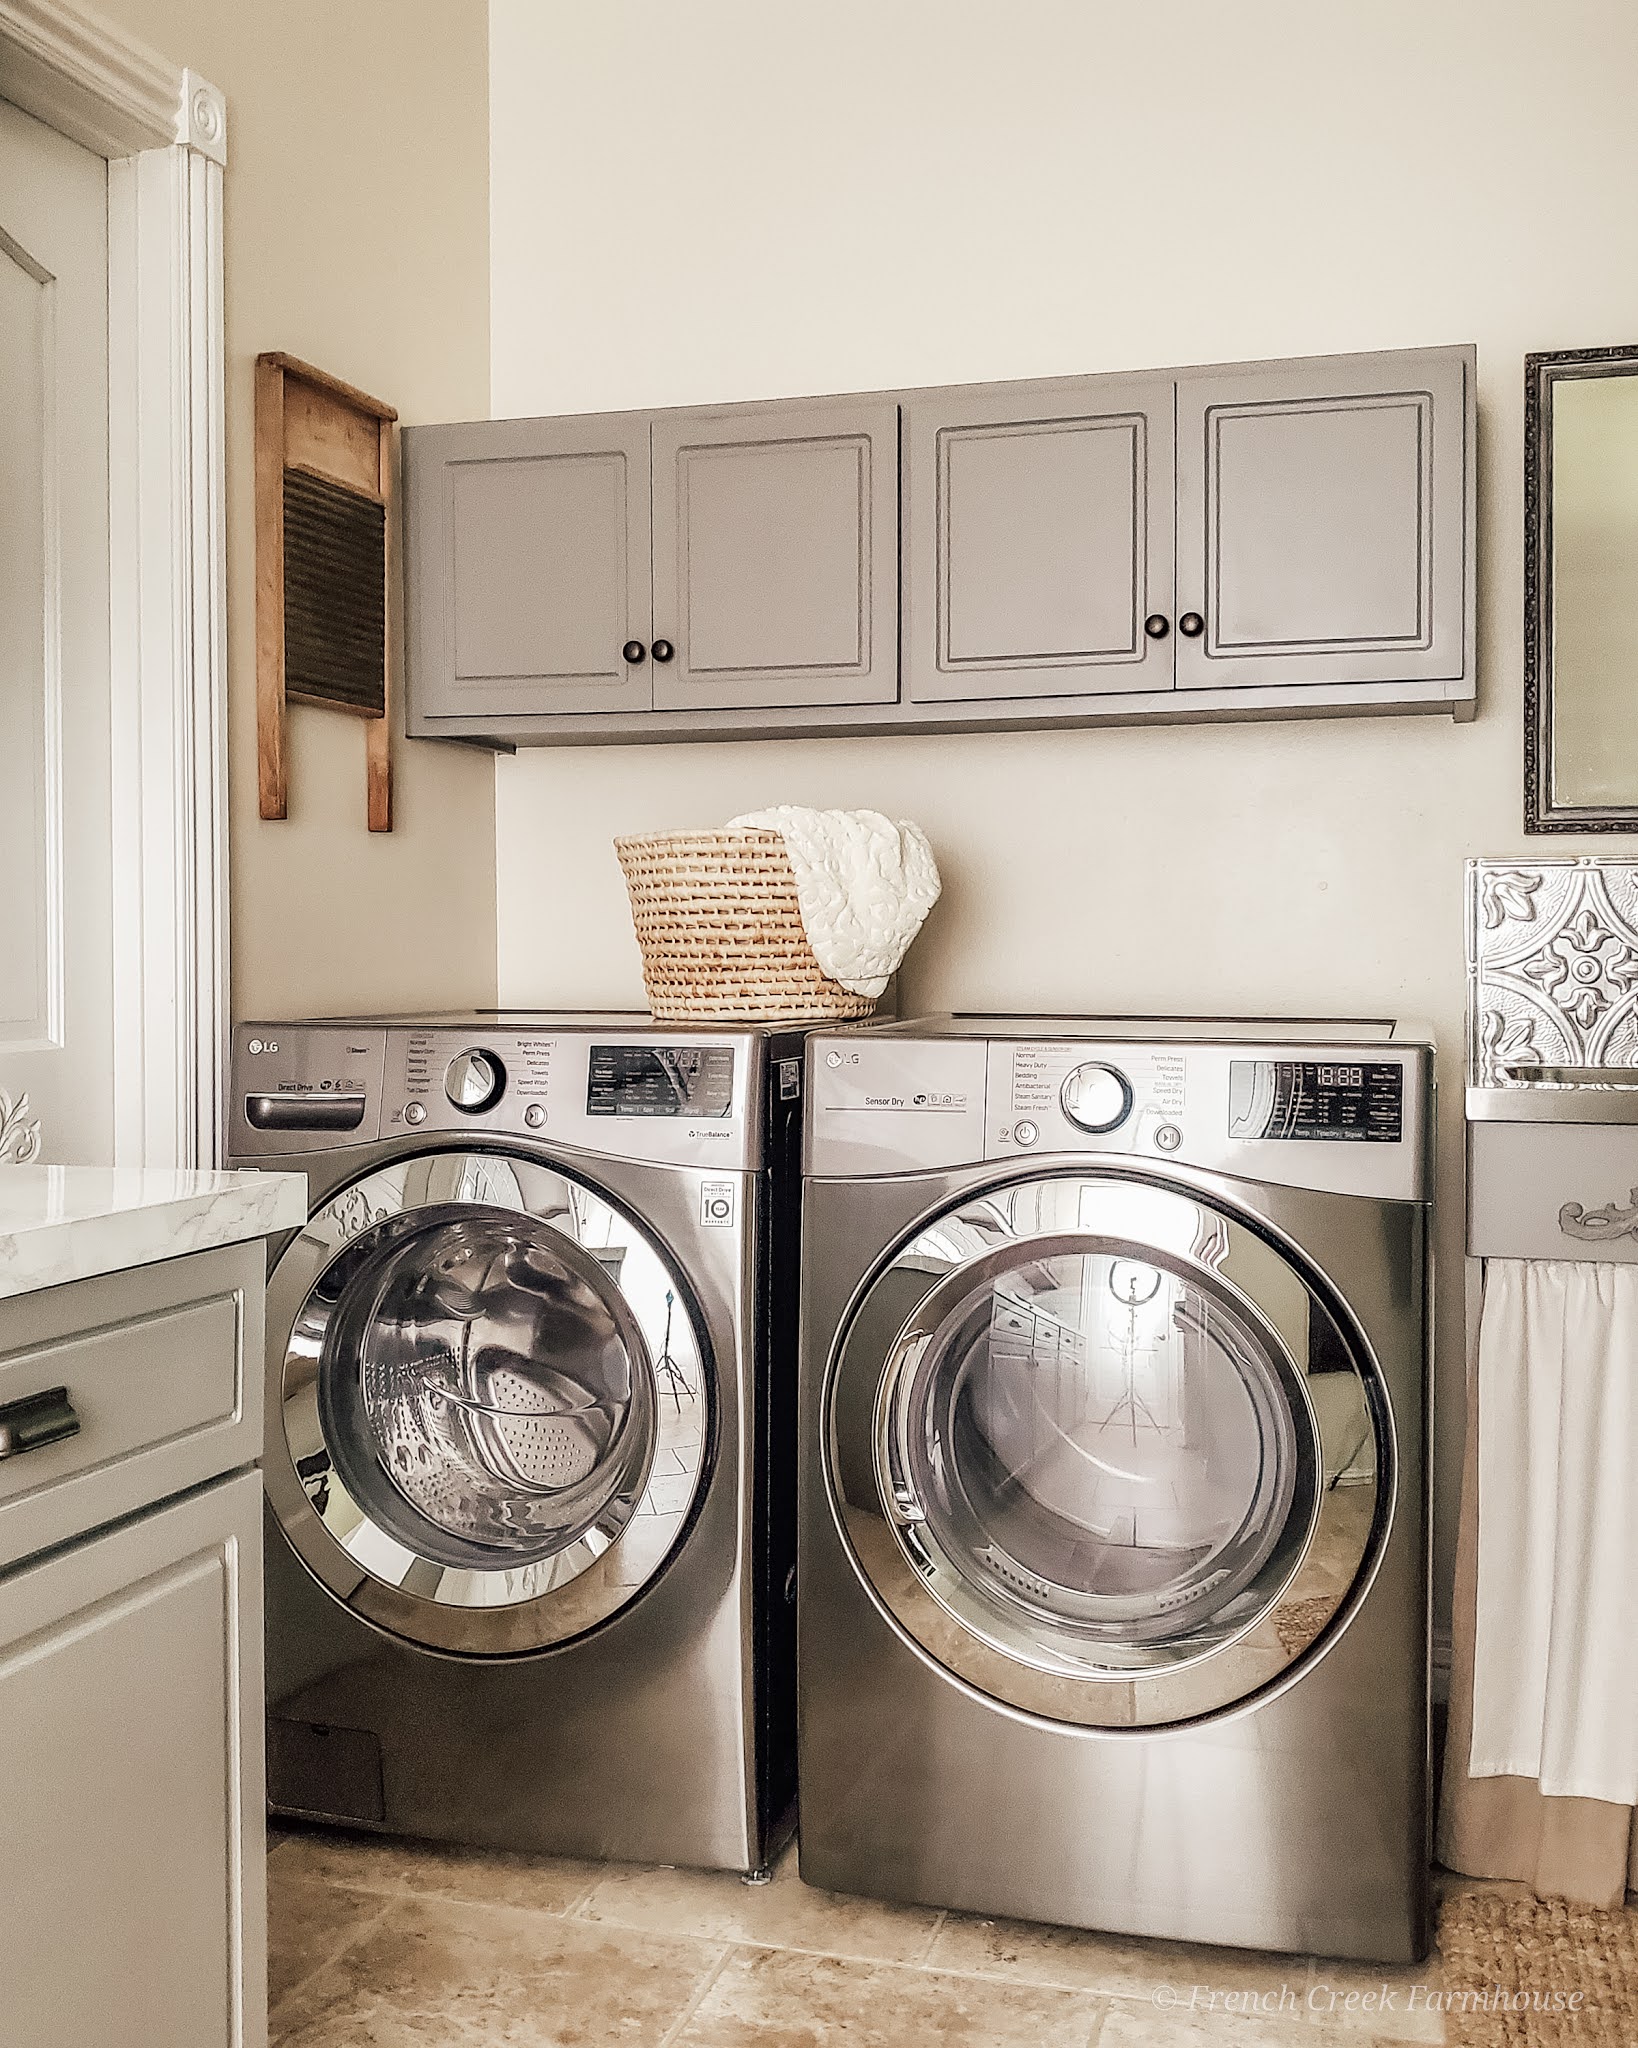 Decorating with vintage items adds a true farmhouse feeling to our laundry room